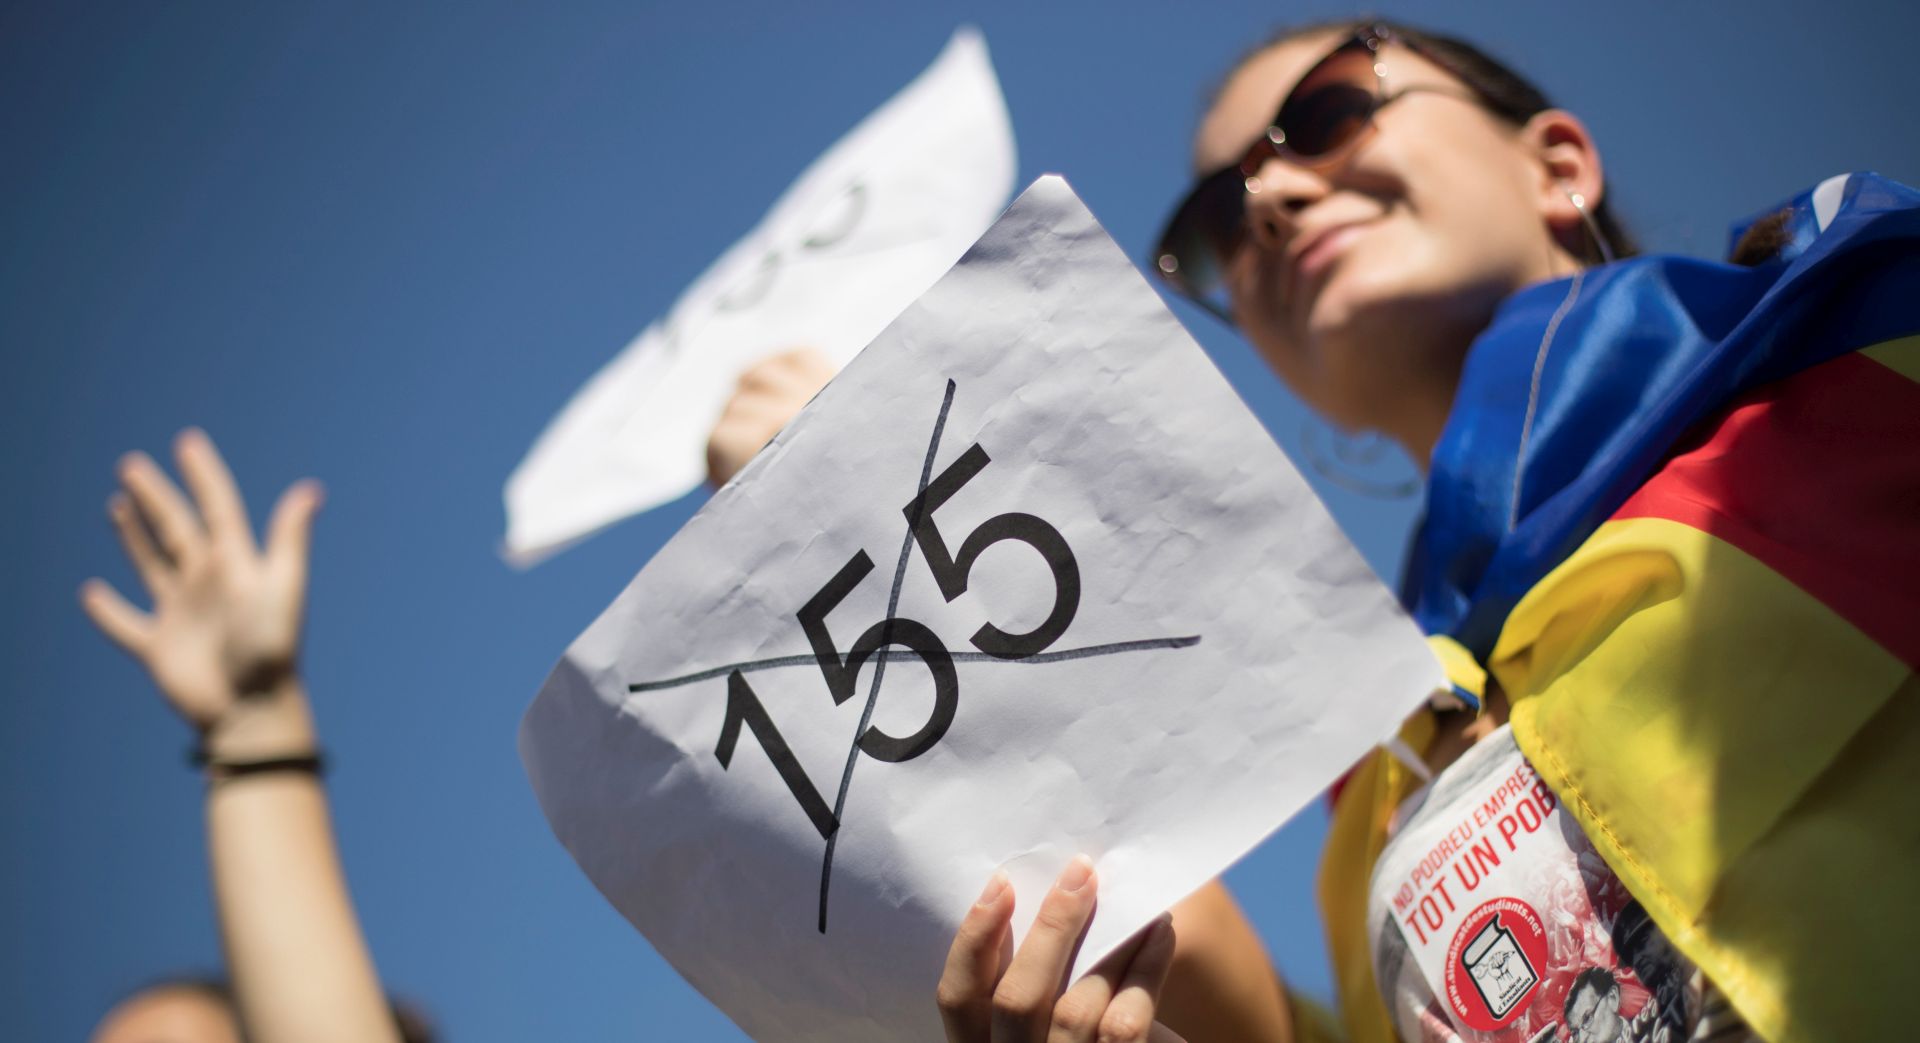 epa06290581 A participant shows a sign with the number 155 crossed out, during a protest of Catalan university and secondary students against the application of the Spanish Constitution's Article 155 to the Catalonia Region, in Barcelona, northeastern Spain, 26 October 2017. The students marched downtown Barcelona to ask for the release of the presidents of the Catalan National Assembly (ANC) and Omniun, Jordi Sanchez and Jordi Cuixart, as well as the proclamation of the independence in Catalonia. Meanwhile, Catalan President, Carles Puigdemont, is expected to give an inminent press conference to announce whether he calls for early elections in Catalonia or establishes the unilateral declaration of independence.  EPA/MARTA PEREZ